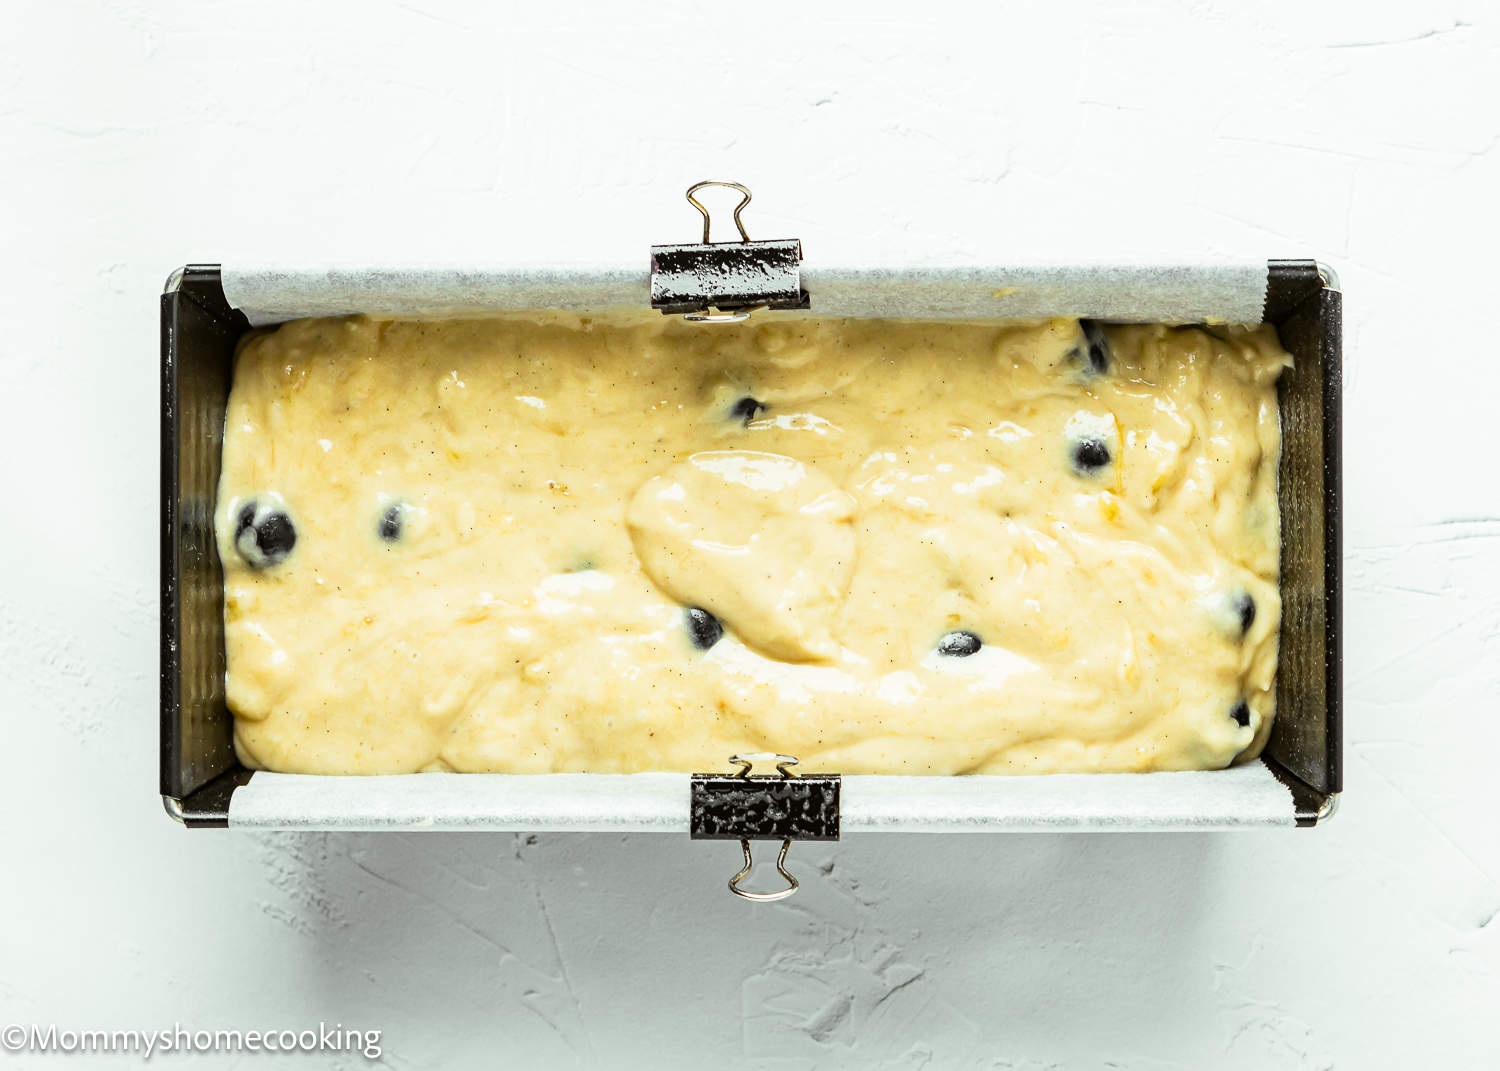 Blueberry Banana Bread batter in a loaf pan.